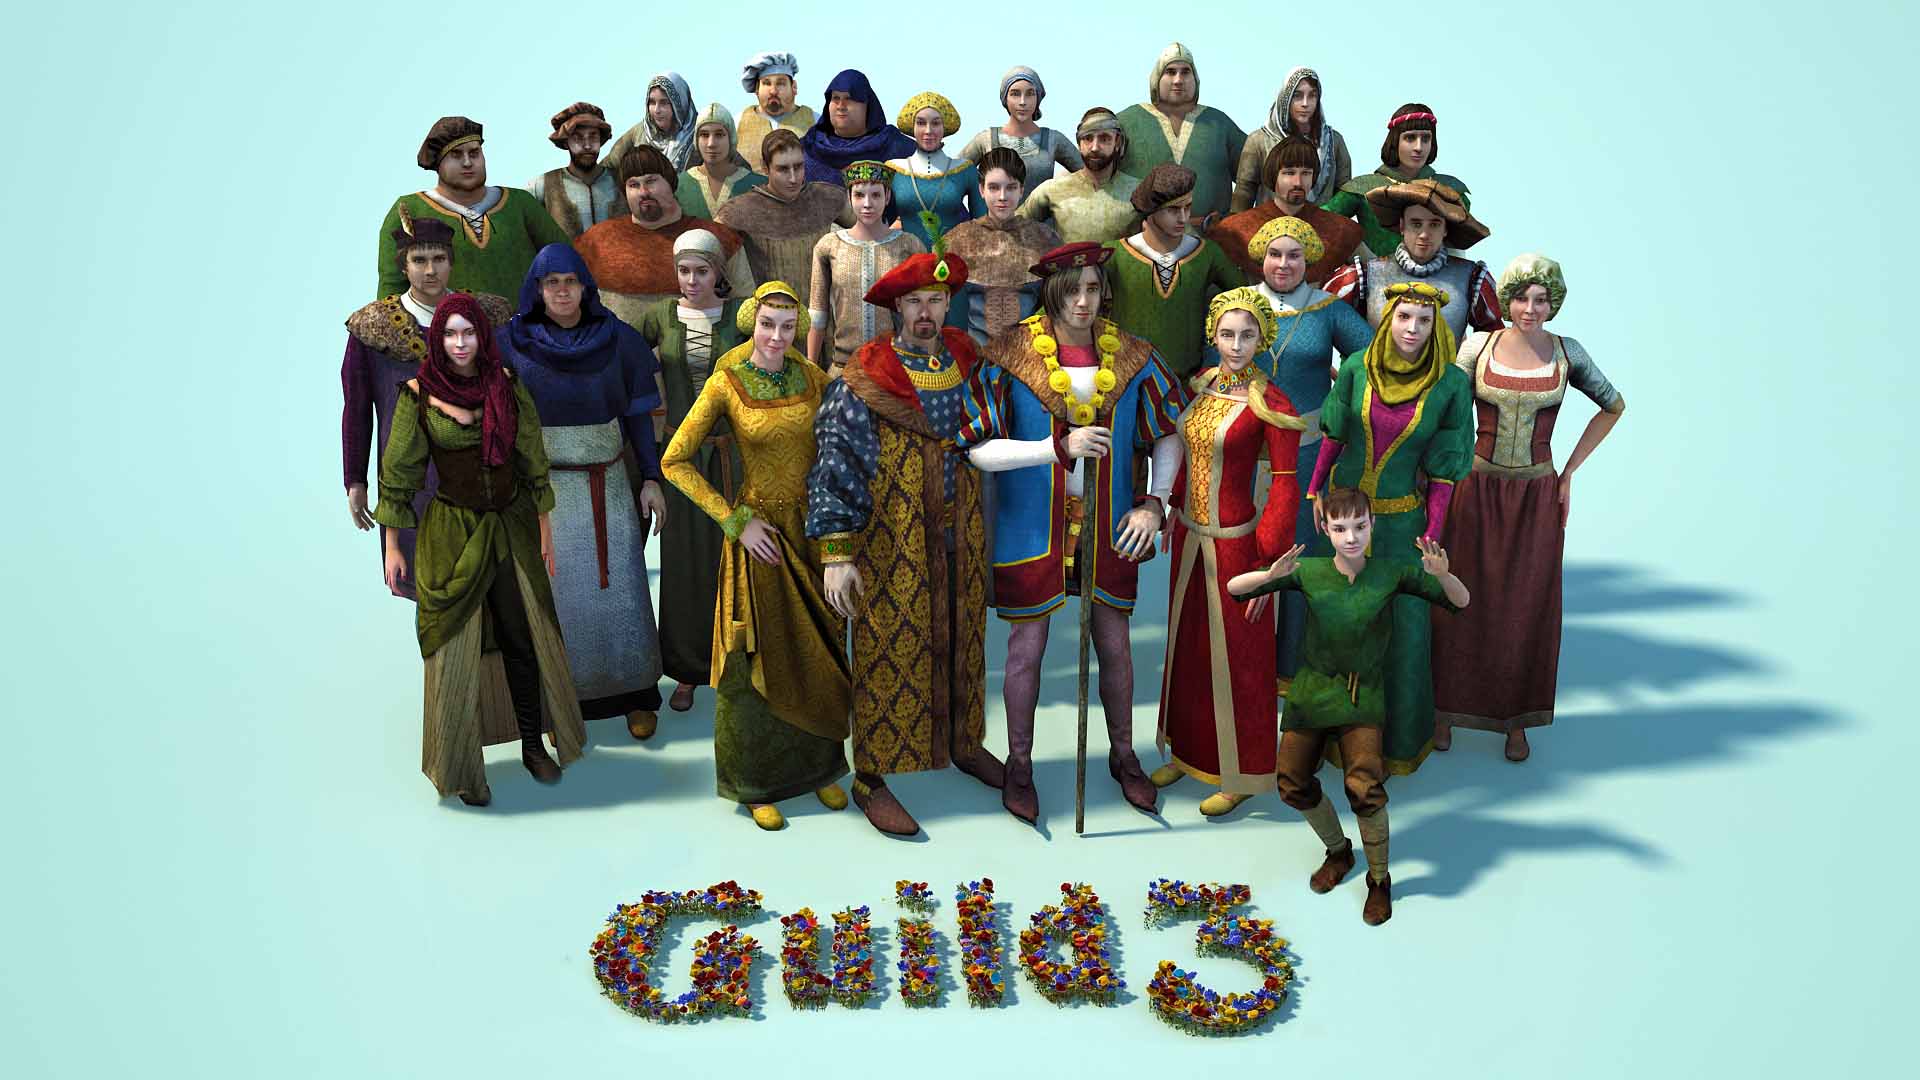 The Guild 3 for apple download